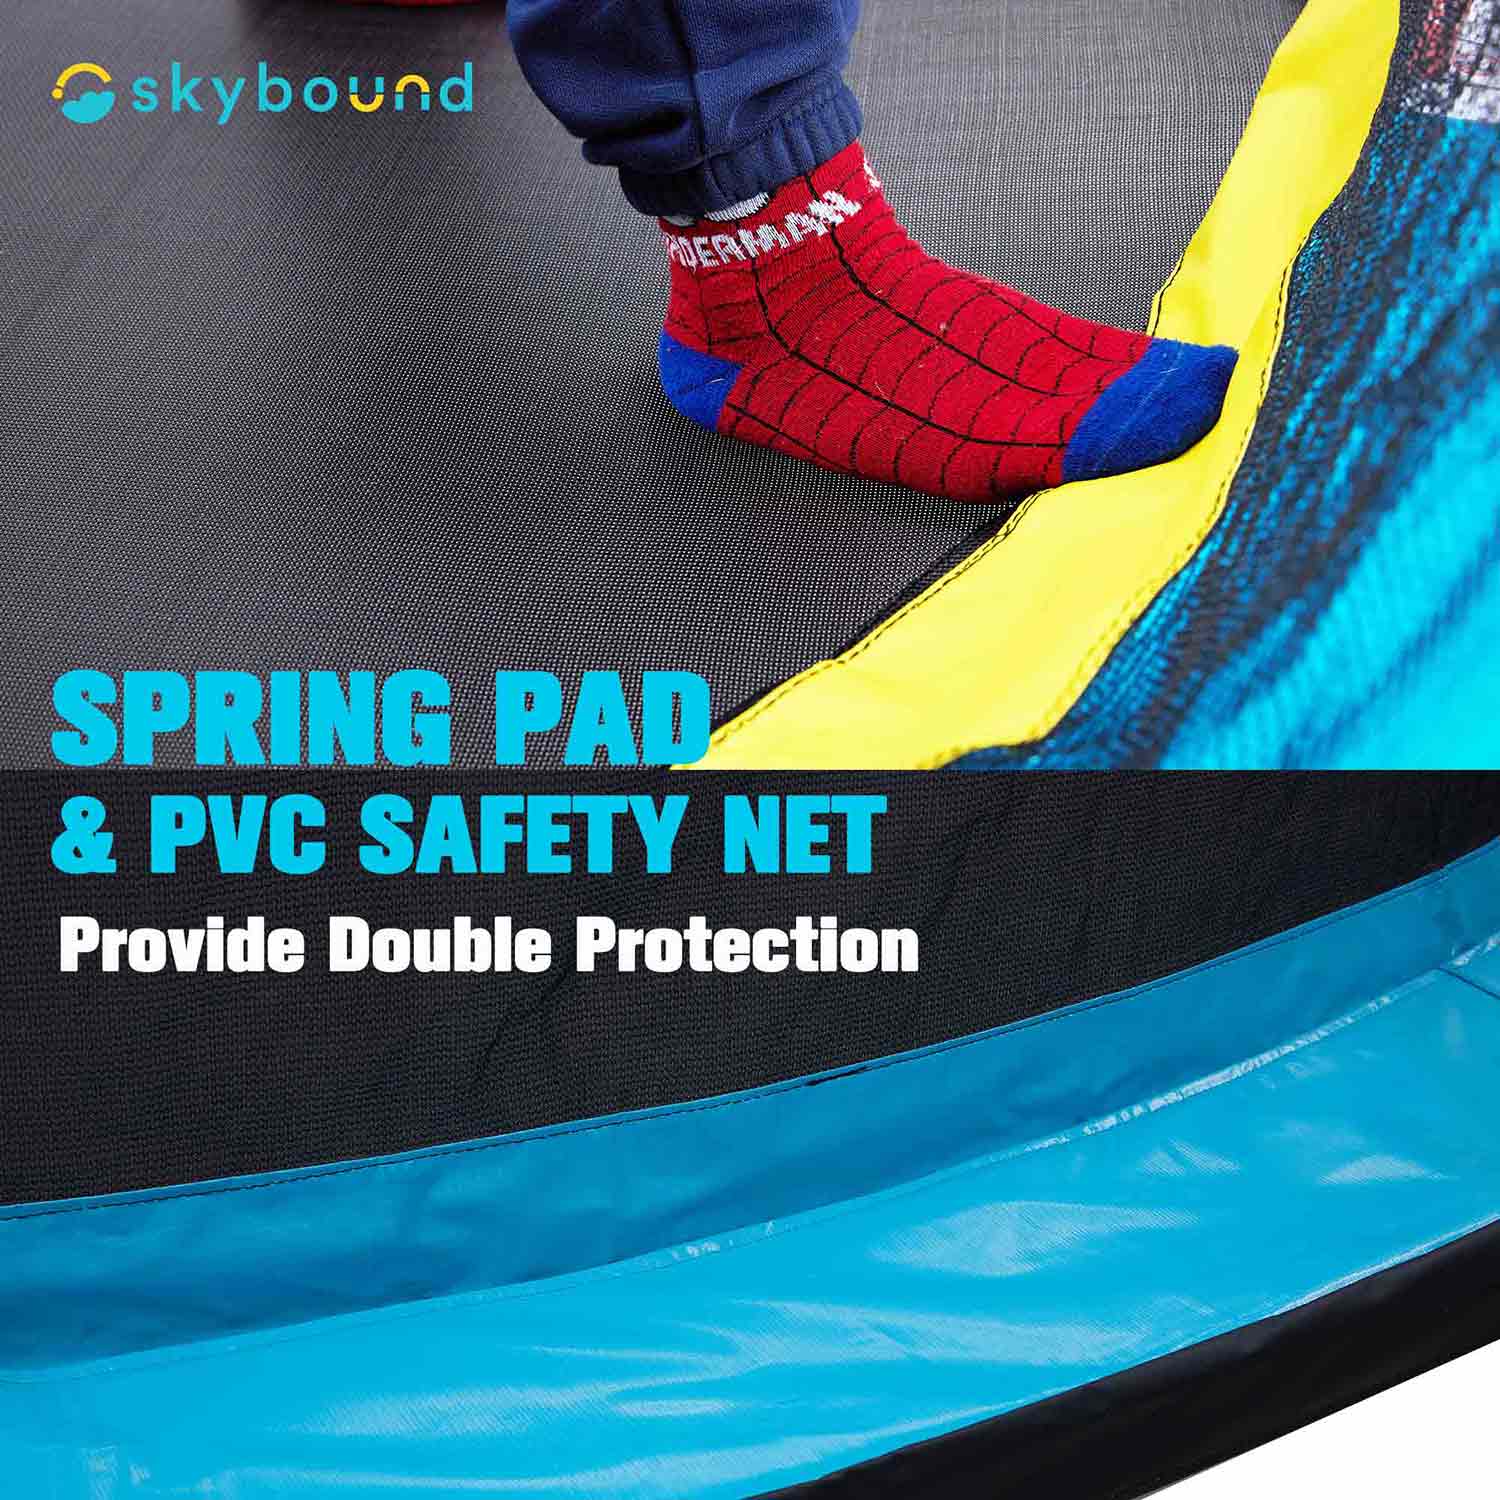 SkyBound-kids-Trampoline-6ft-Spring-PAD-and-PVC-Safety-Net-Provide-Double-Protection